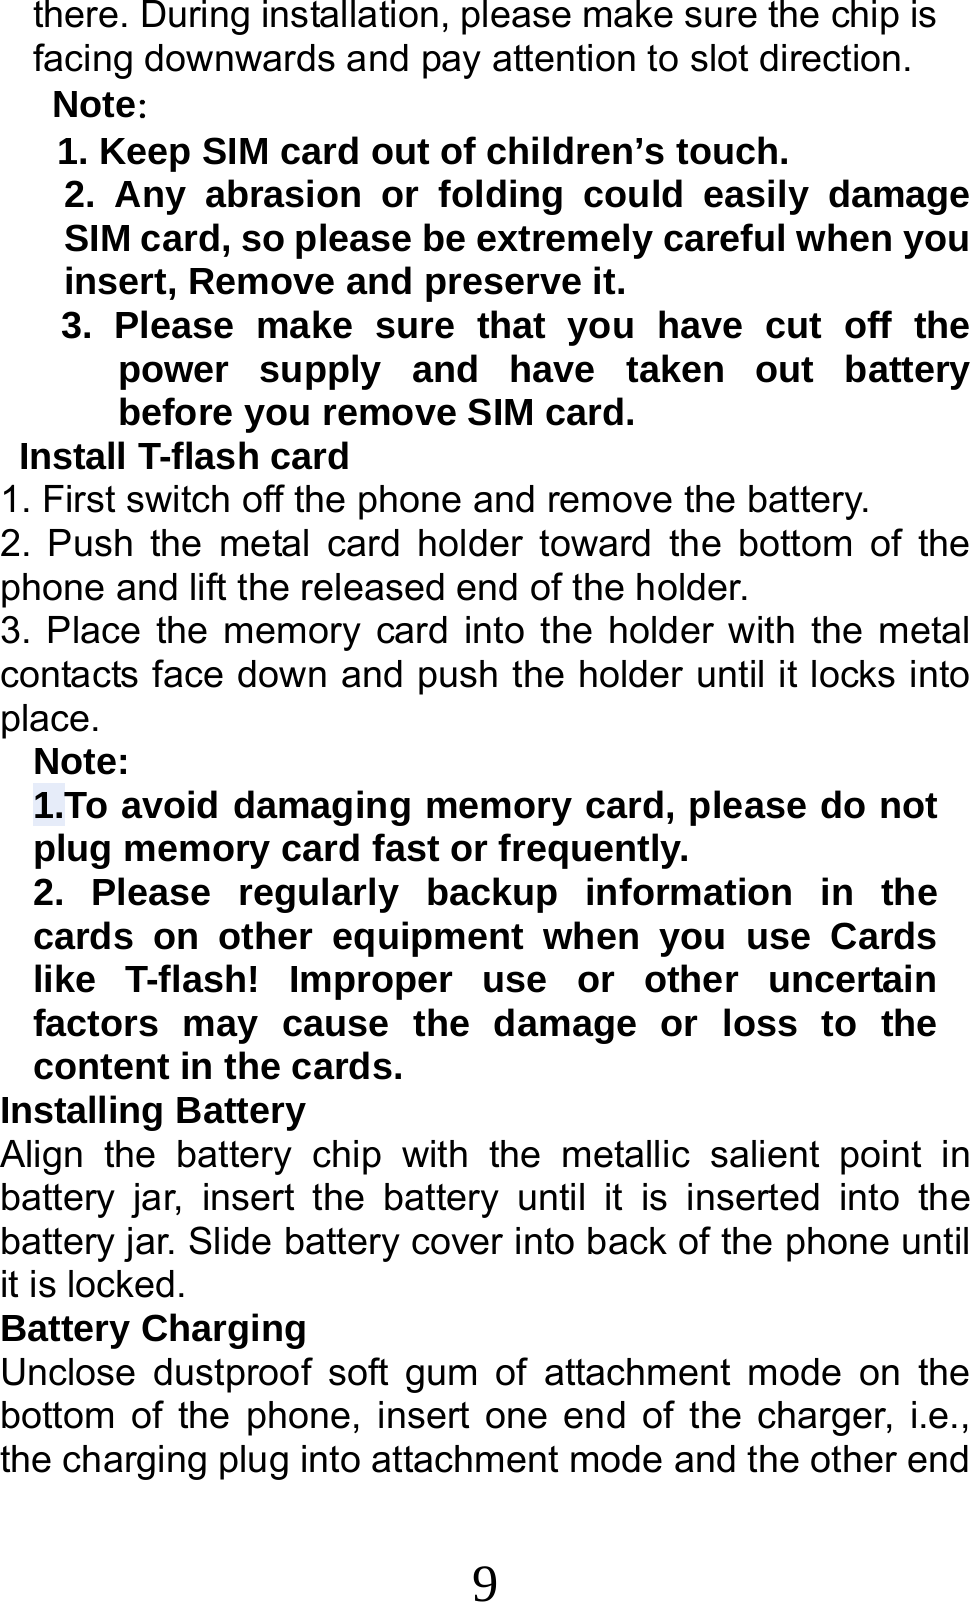 9 there. During installation, please make sure the chip is facing downwards and pay attention to slot direction. Note：  1. Keep SIM card out of children’s touch. 2. Any abrasion or folding could easily damage SIM card, so please be extremely careful when you insert, Remove and preserve it. 3. Please make sure that you have cut off the power supply and have taken out battery before you remove SIM card.  Install T-flash card 1. First switch off the phone and remove the battery. 2. Push the metal card holder toward the bottom of the phone and lift the released end of the holder. 3. Place the memory card into the holder with the metal contacts face down and push the holder until it locks into place. Note: 1.To avoid damaging memory card, please do not plug memory card fast or frequently. 2. Please regularly backup information in the cards on other equipment when you use Cards like T-flash! Improper use or other uncertain factors may cause the damage or loss to the content in the cards. Installing Battery Align the battery chip with the metallic salient point in battery jar, insert the battery until it is inserted into the battery jar. Slide battery cover into back of the phone until it is locked. Battery Charging Unclose dustproof soft gum of attachment mode on the bottom of the phone, insert one end of the charger, i.e., the charging plug into attachment mode and the other end 